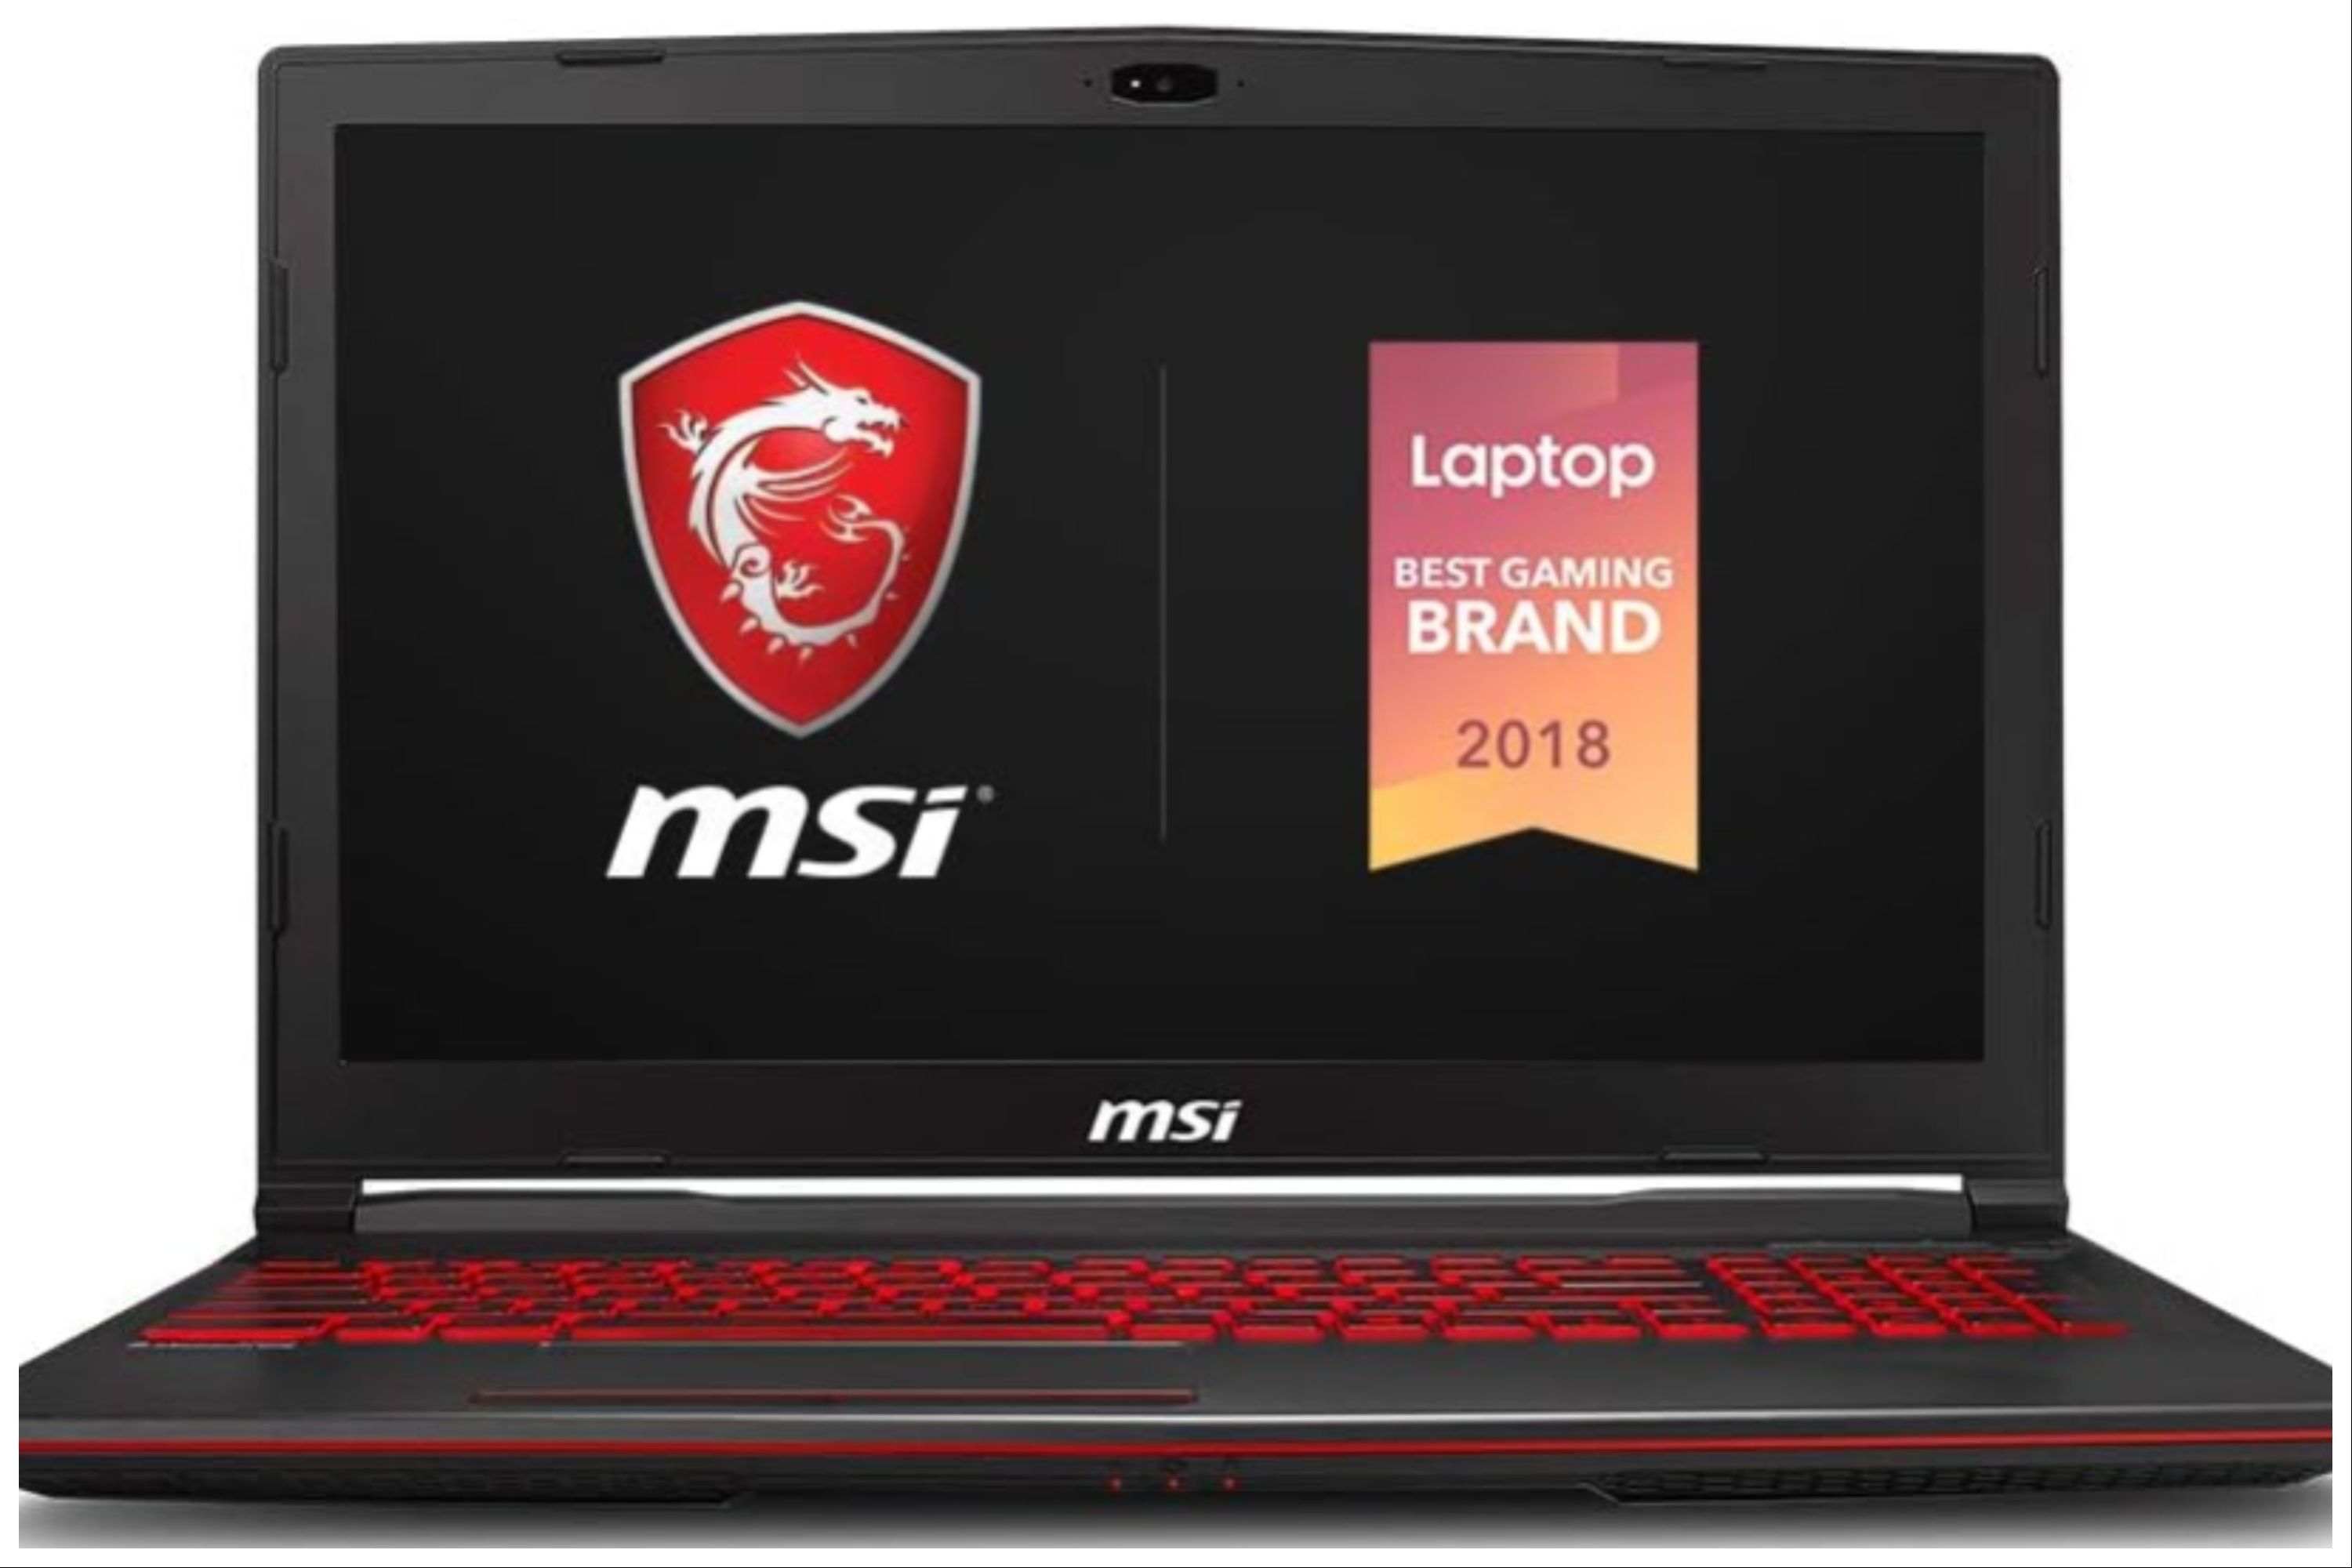 Don’t go overboard as the MSI GL63 gaming laptop is affordable.